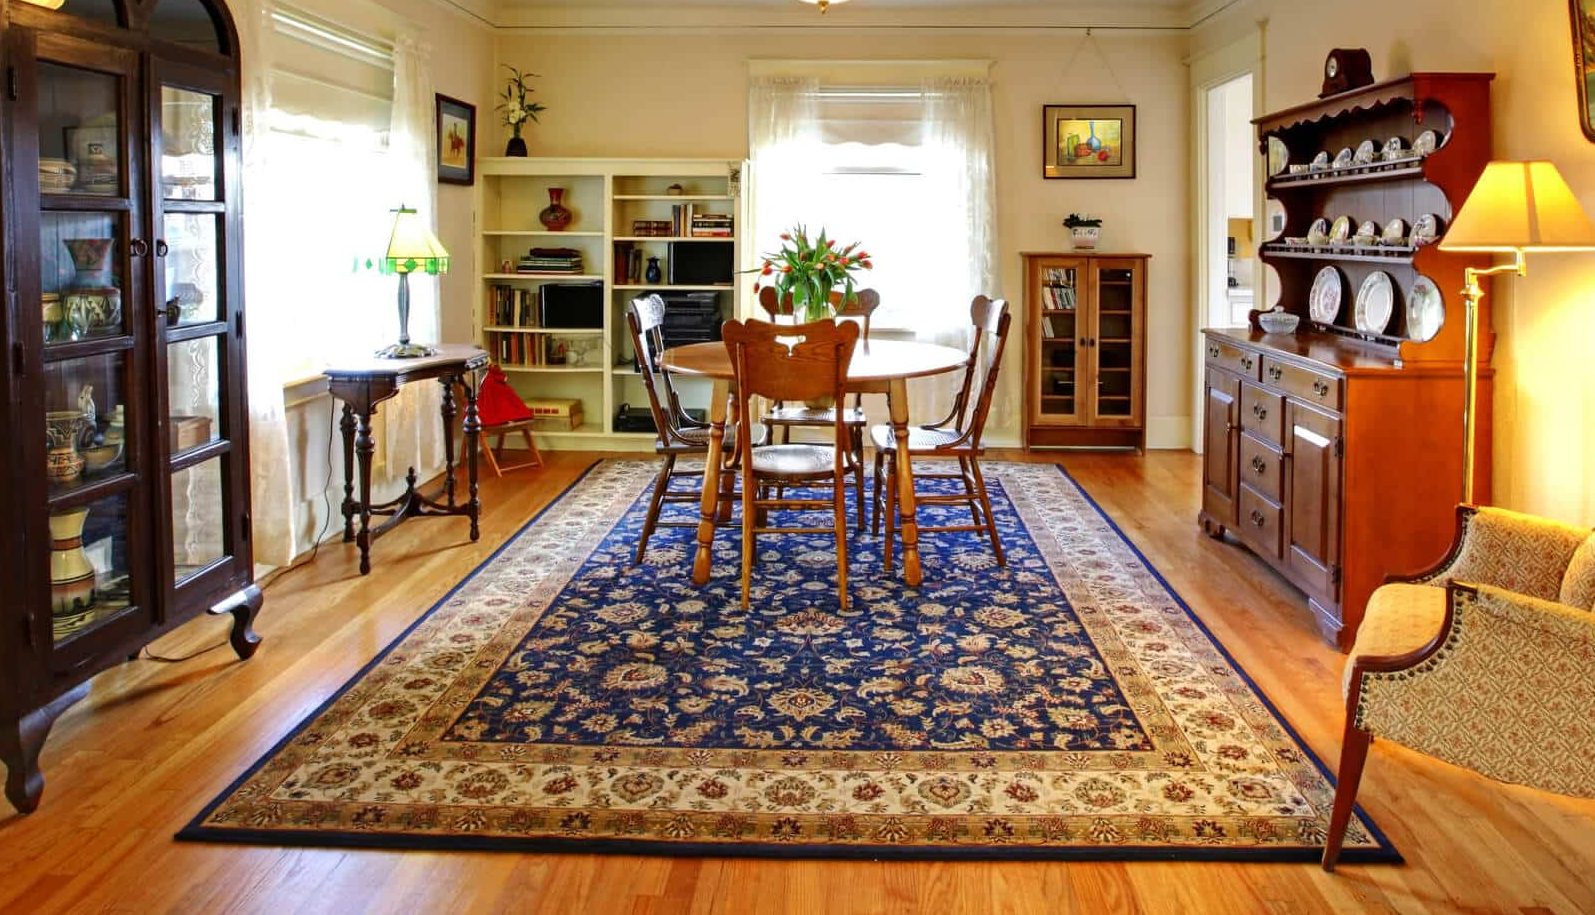 Area Rug Damage Your Hardwood Floor, What Kind Of Rugs Can You Use On Laminate Floors